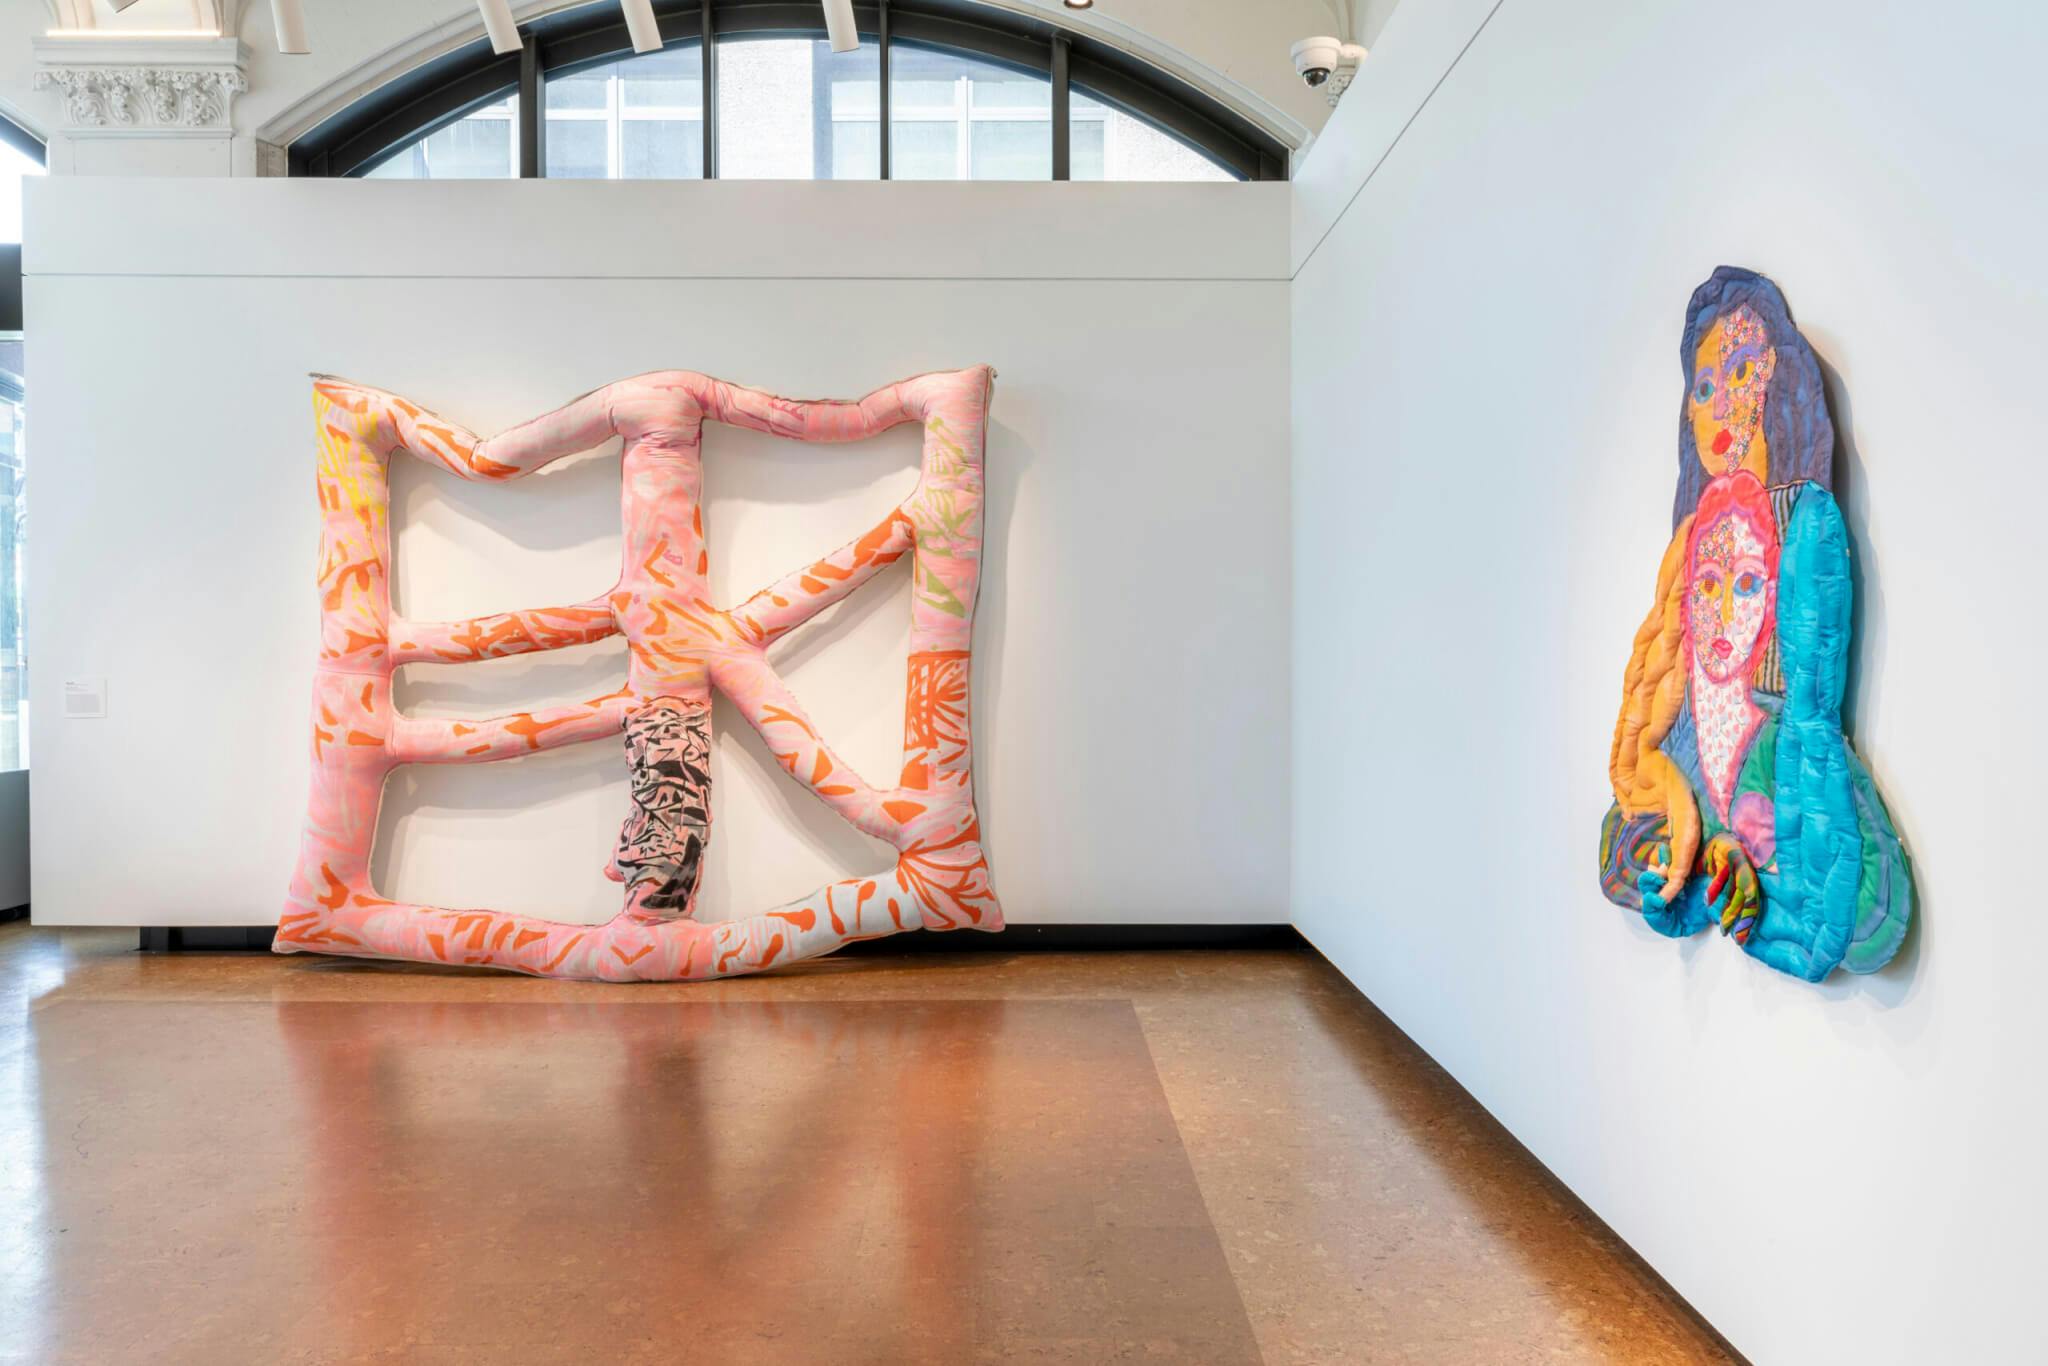 Puffy, padded sculptures appear on display at Boston University Art Galleries.